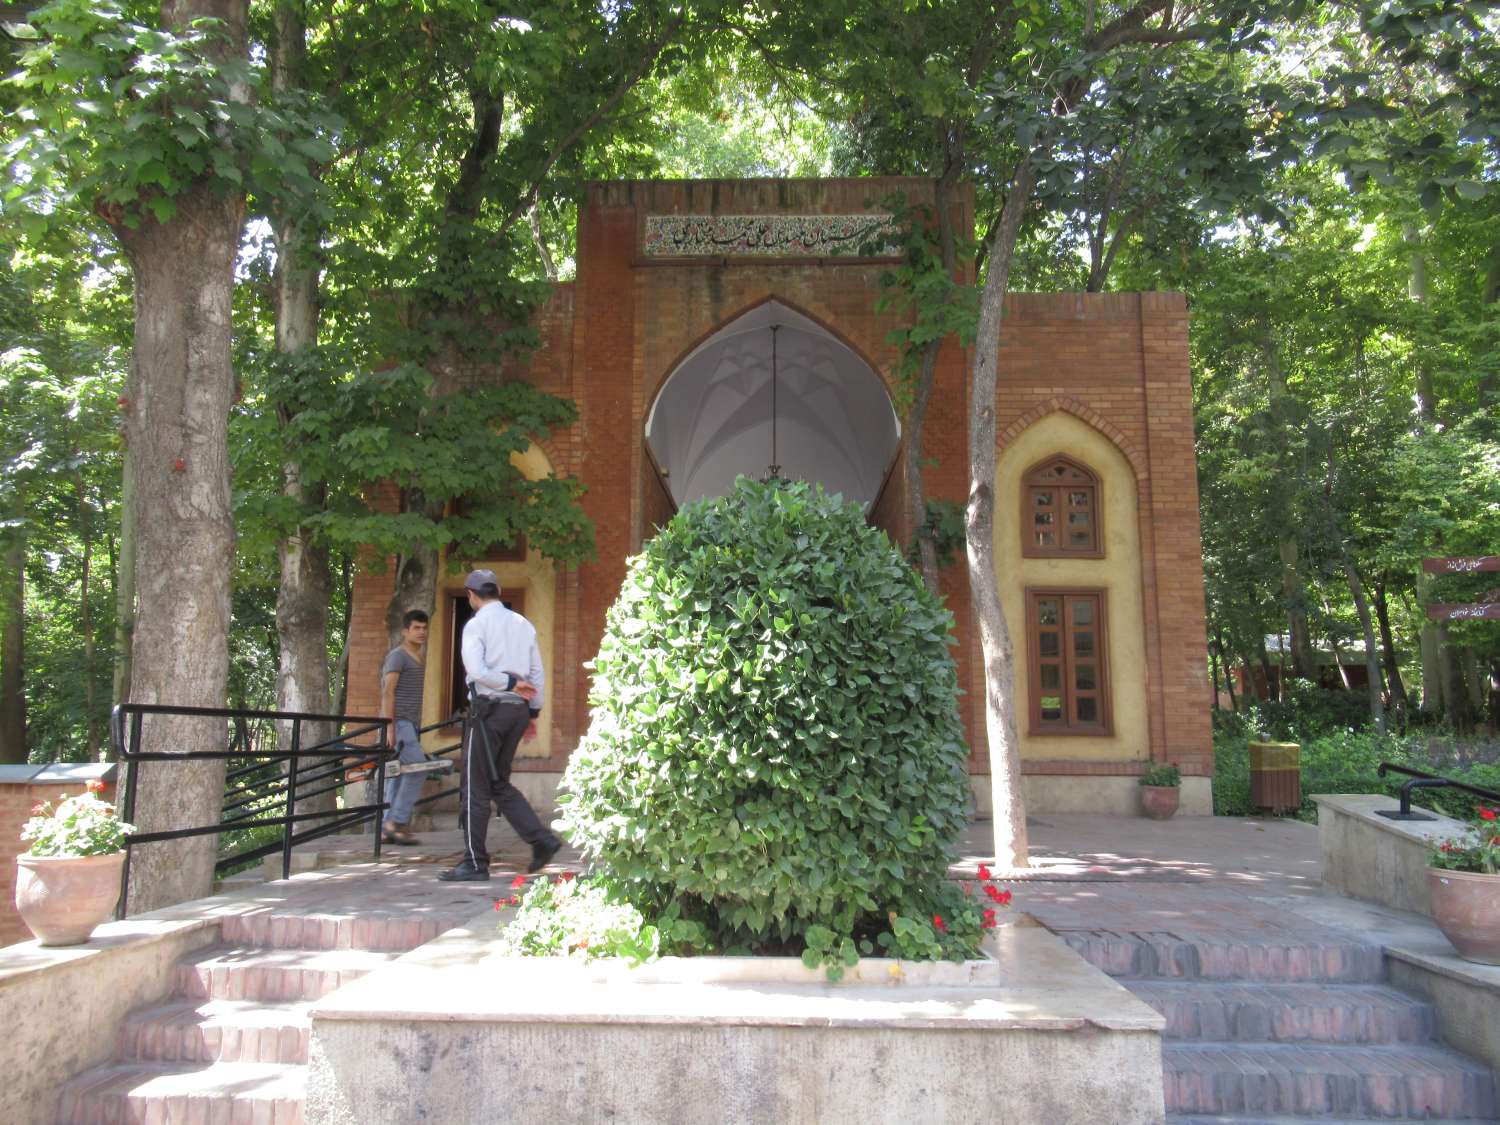 View of entrance.